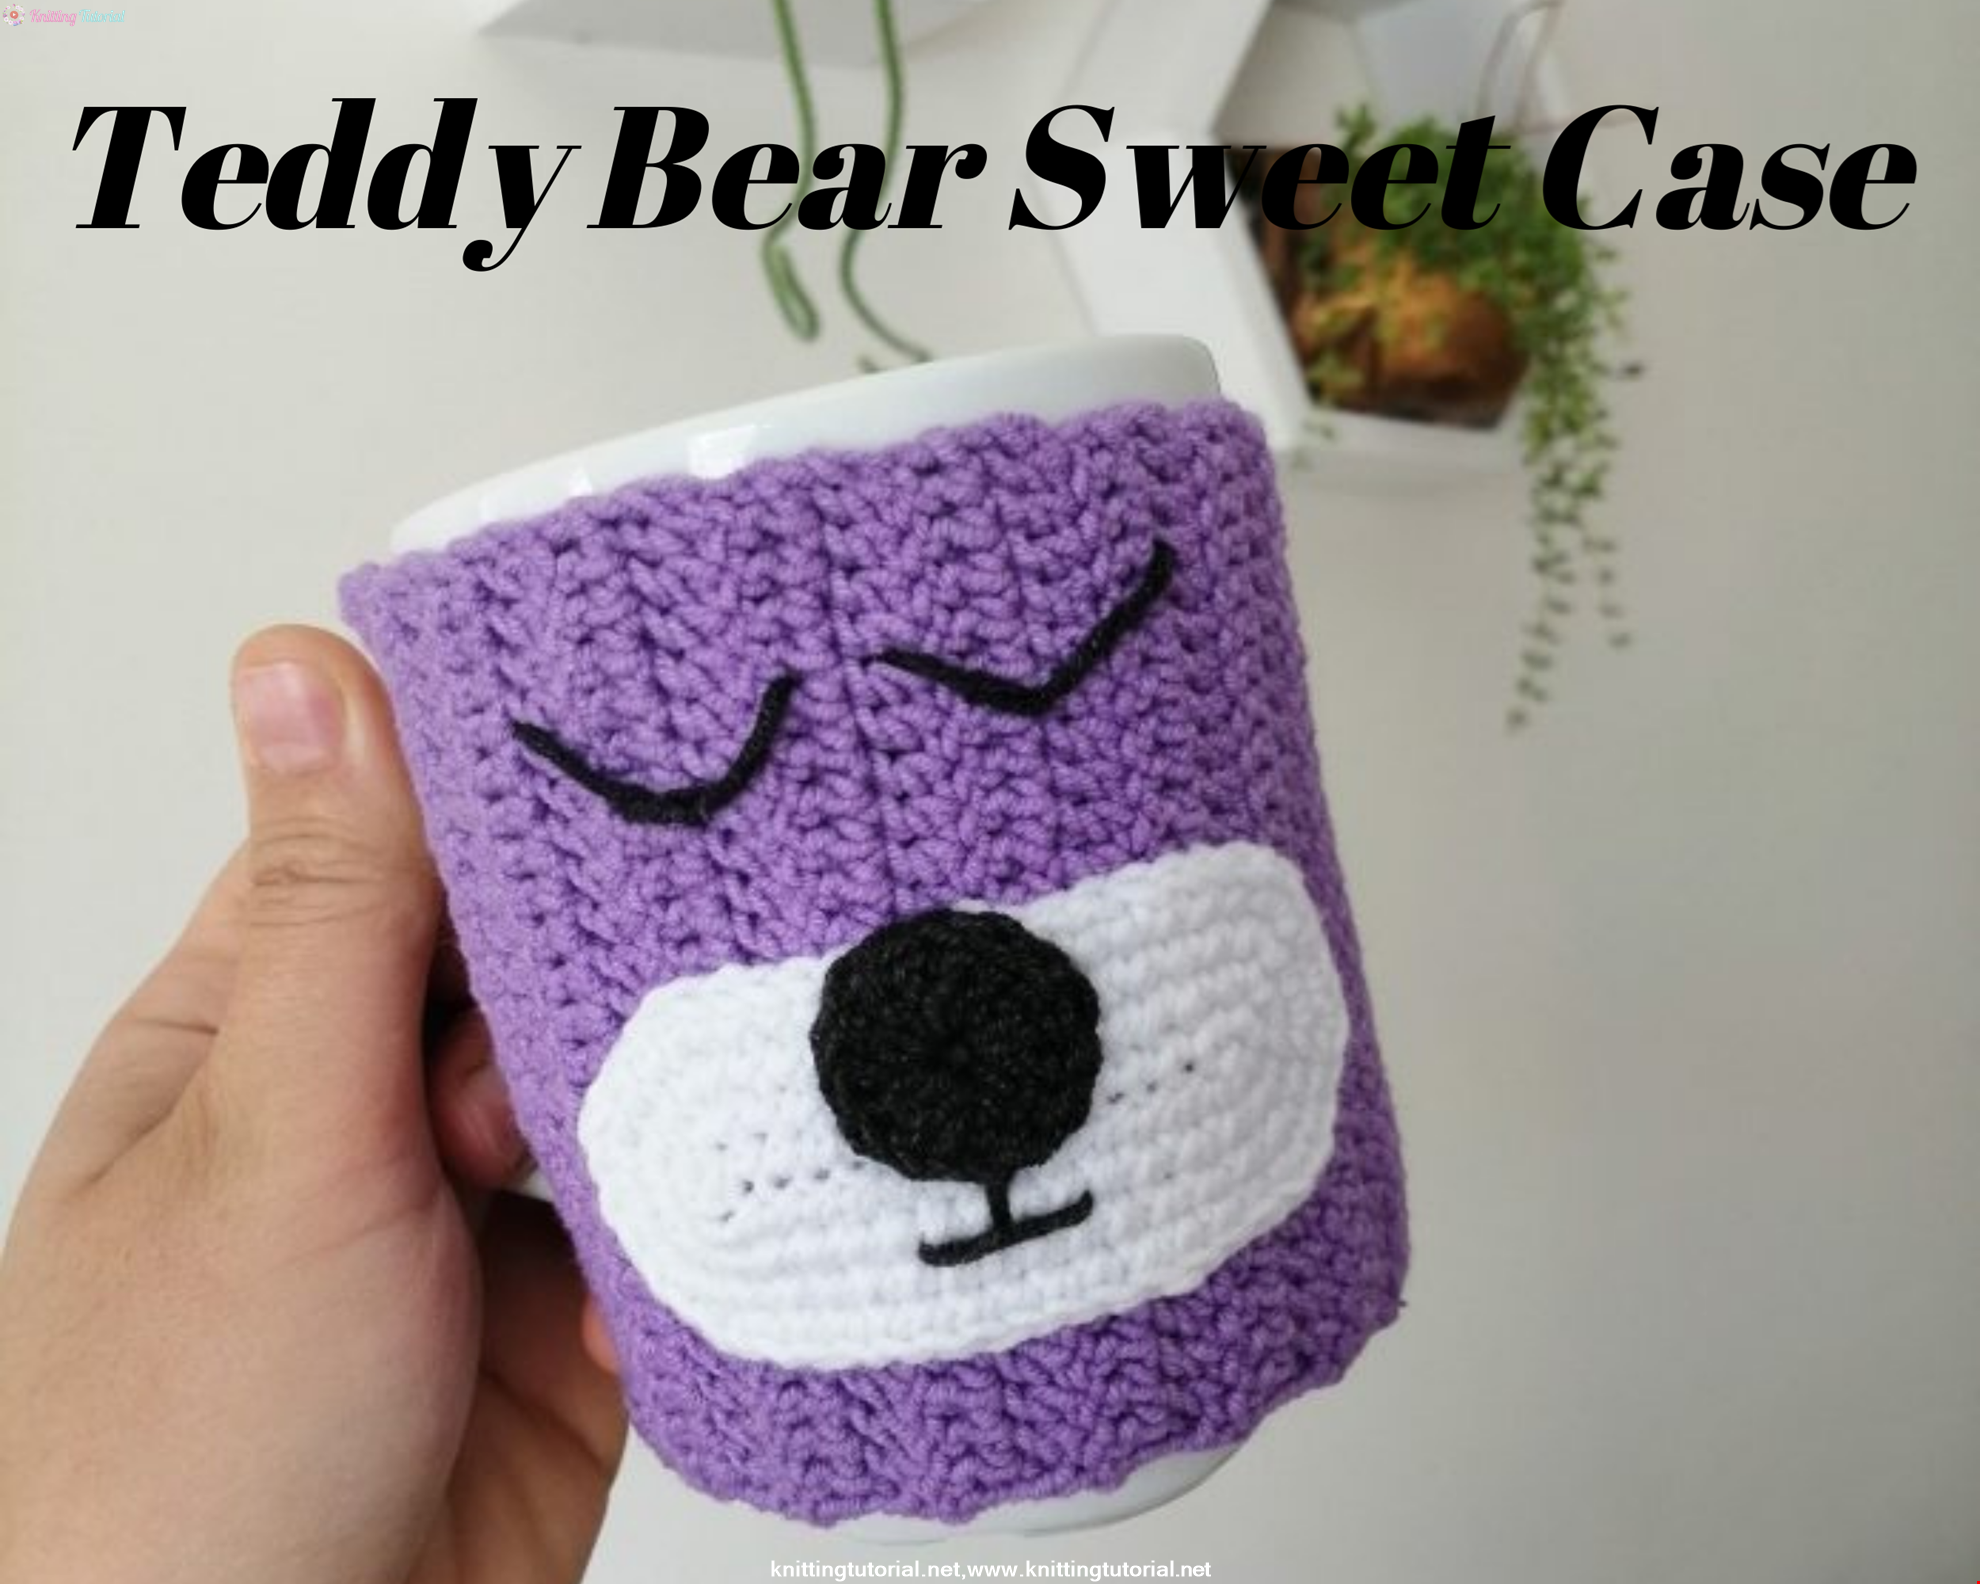 Teddy Bear Cup Cover Making and Recipe